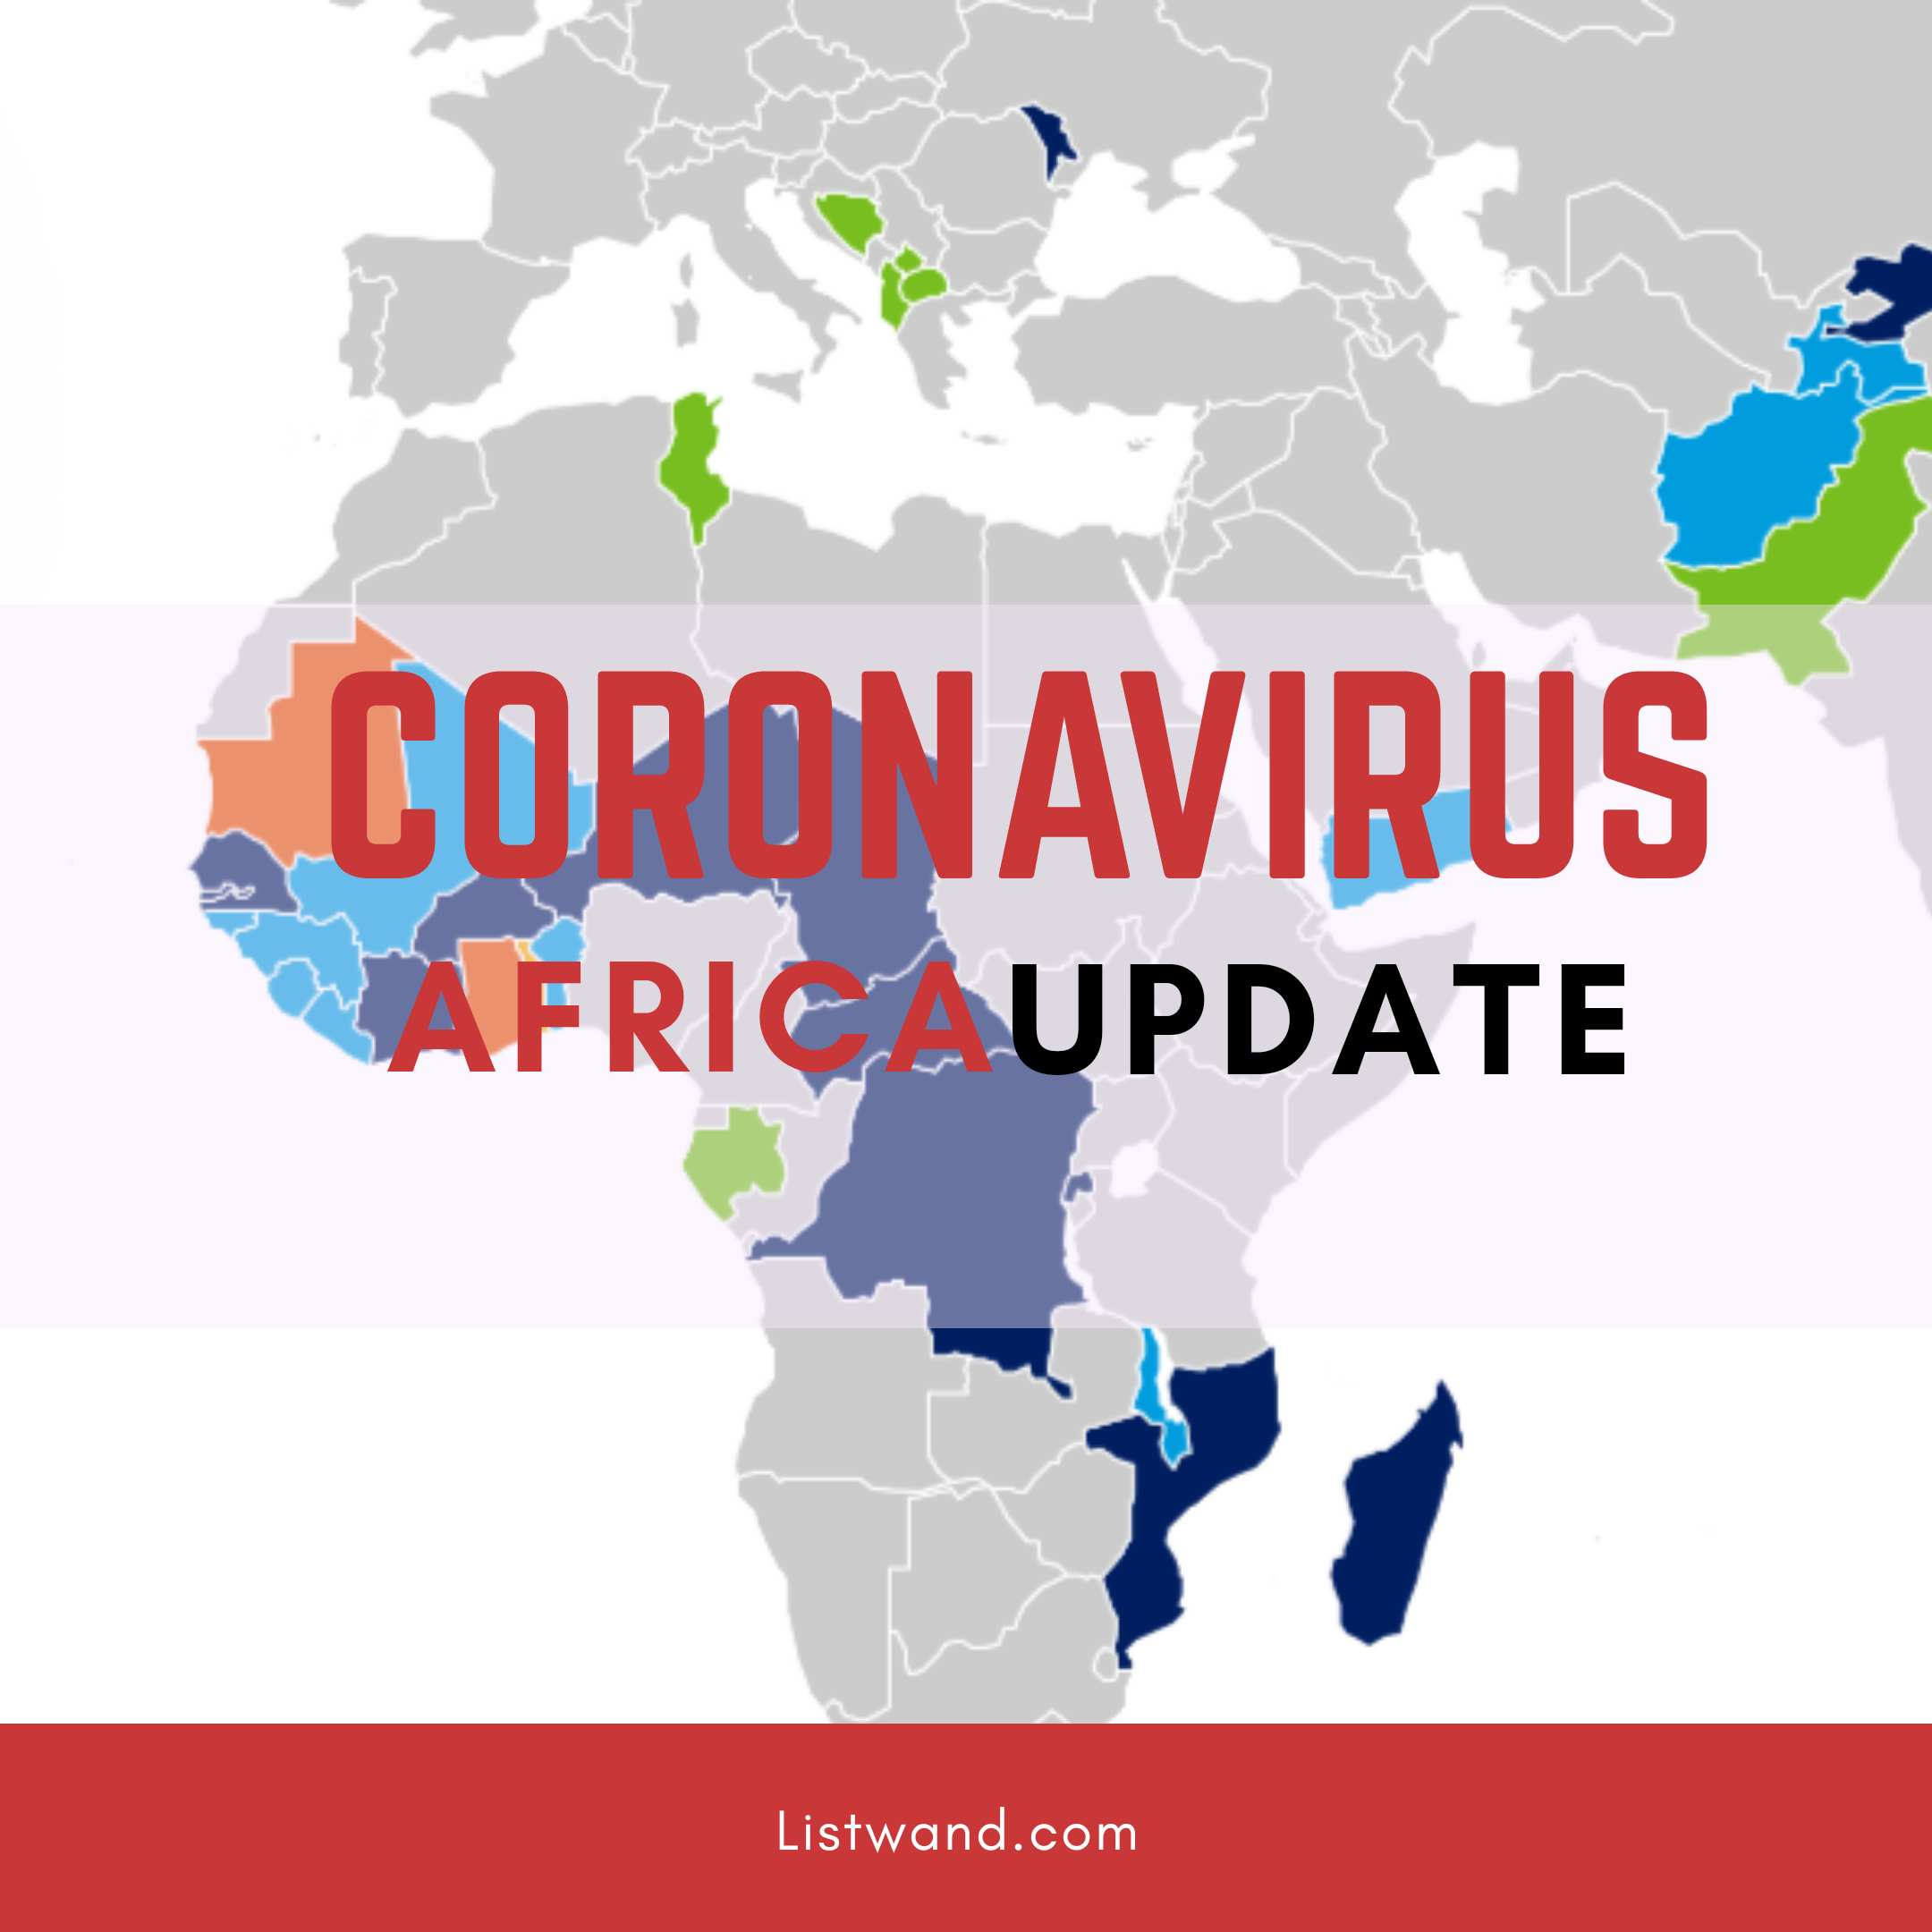 Top 10 African Nations with the Largest Number of COVID-19 Infections